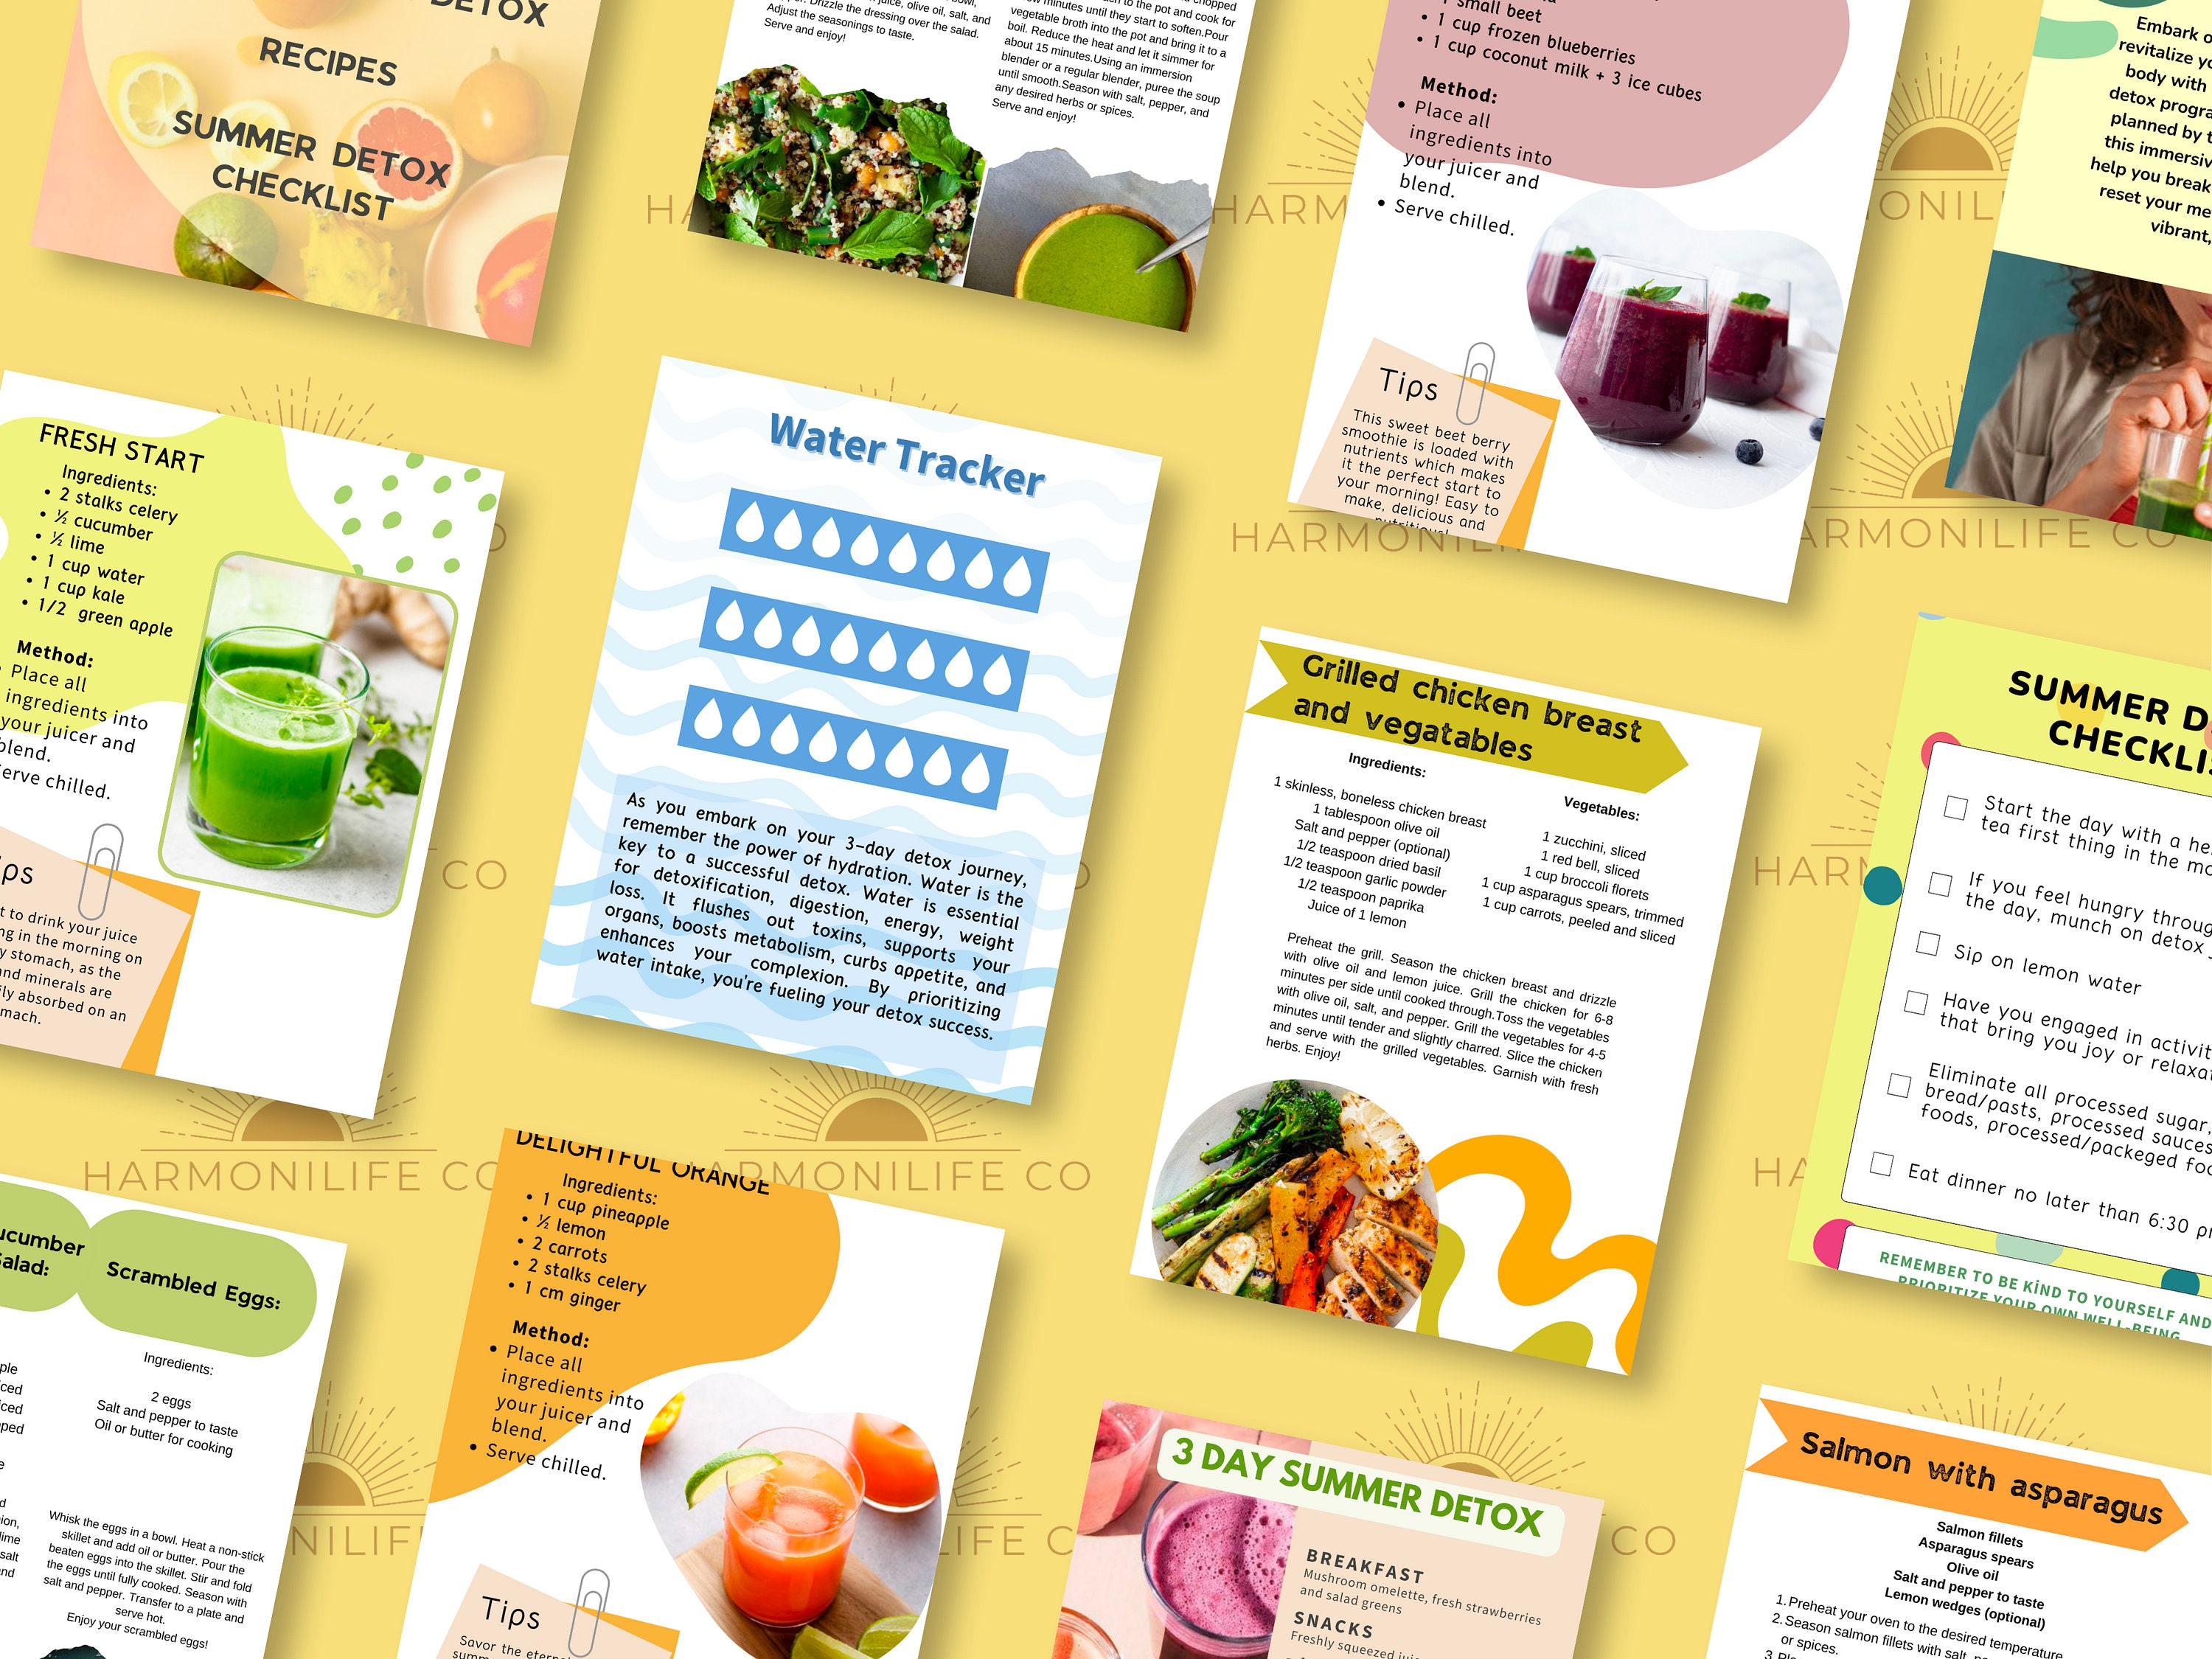 3 Day Summer Detox, Weight Loss Guide, Detox Recipes, Meal Plan